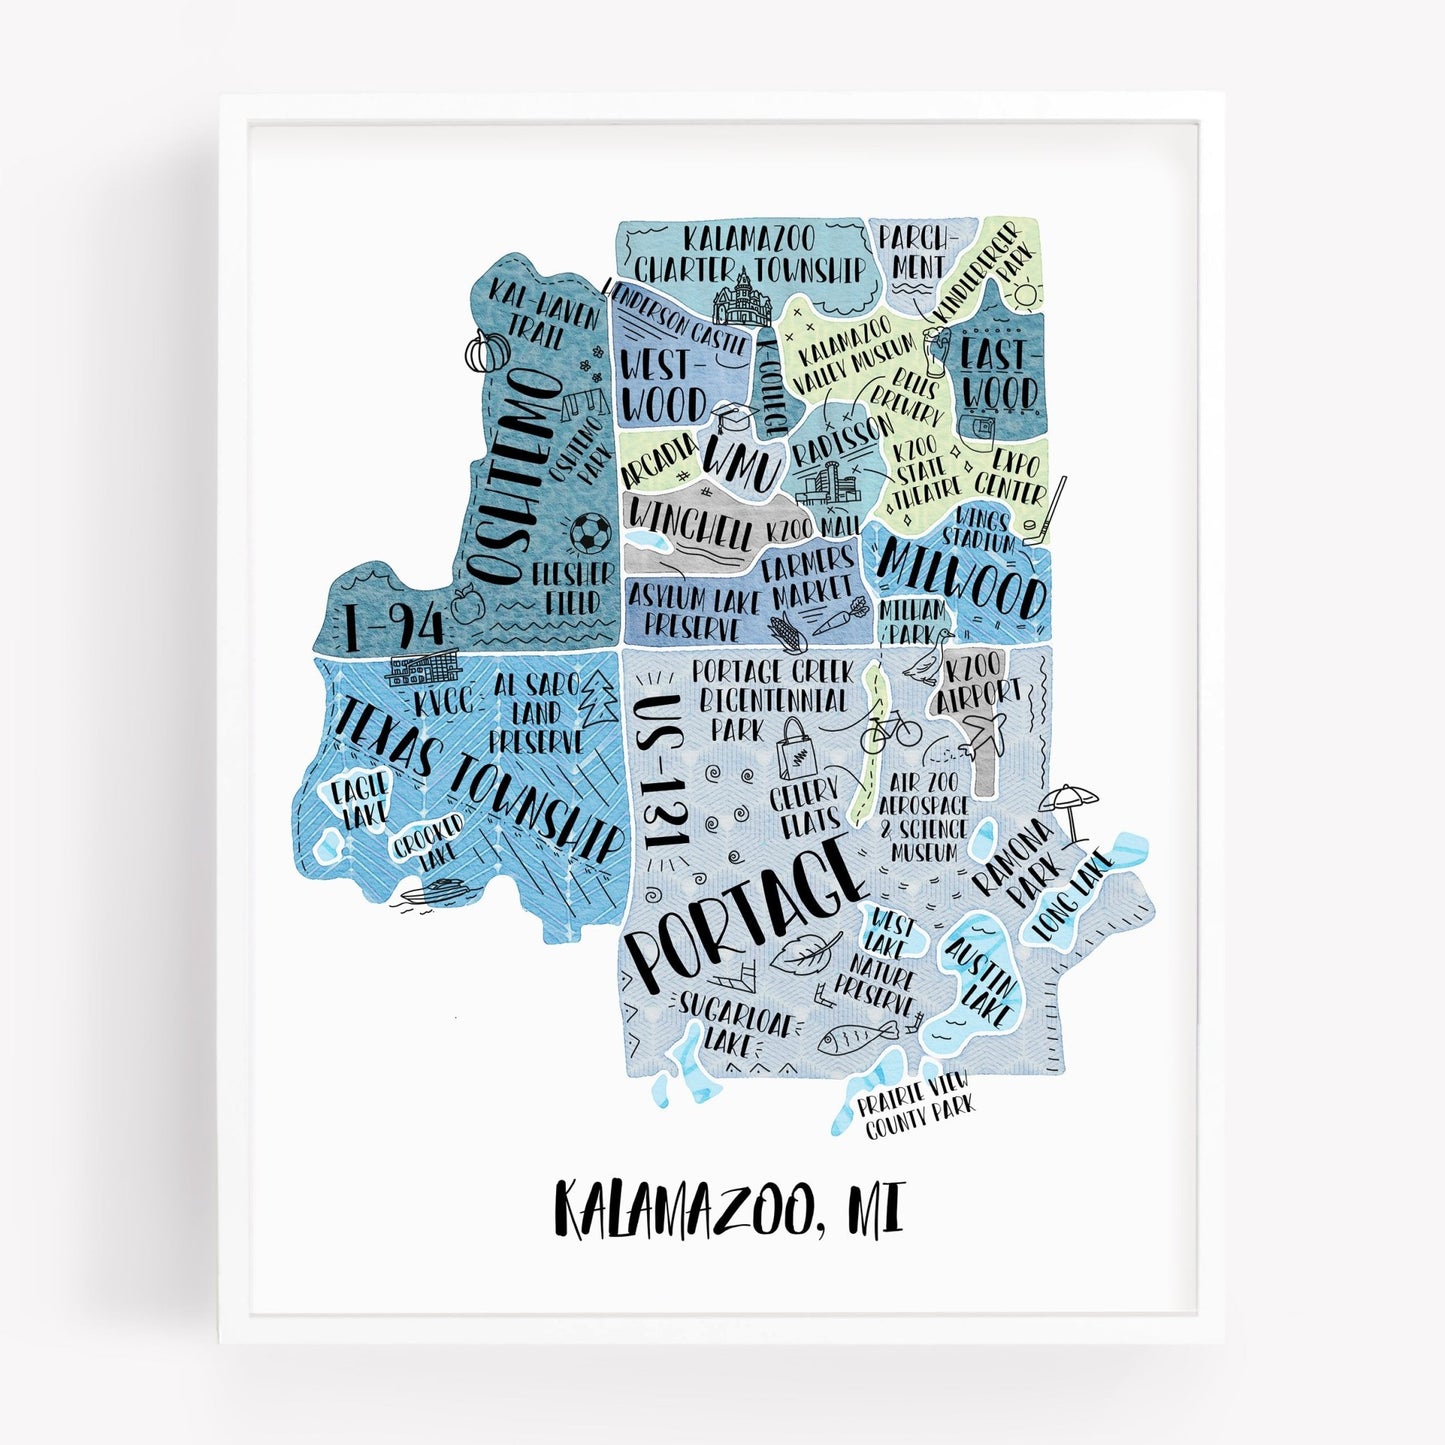 An illustrated map of Kalamazoo Michigan, as a print, in the color blue